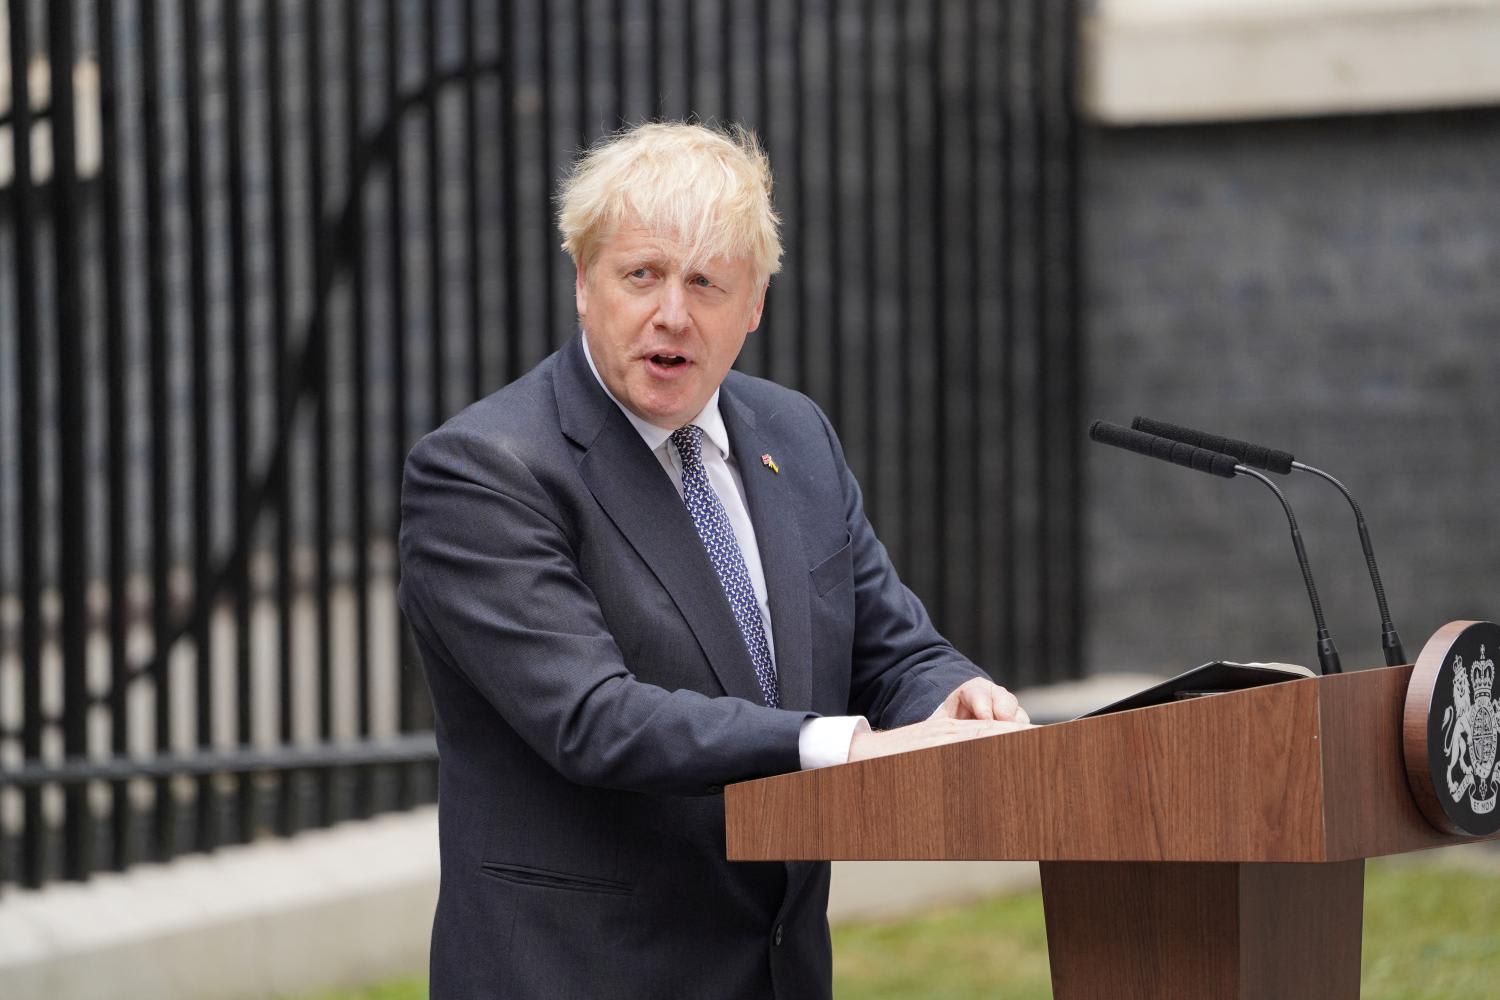 <p>British prime minister&nbsp;Boris&nbsp;Johnson&nbsp;makes a statement at Downing Street in London, Britain on July 7, 2022.</p>
